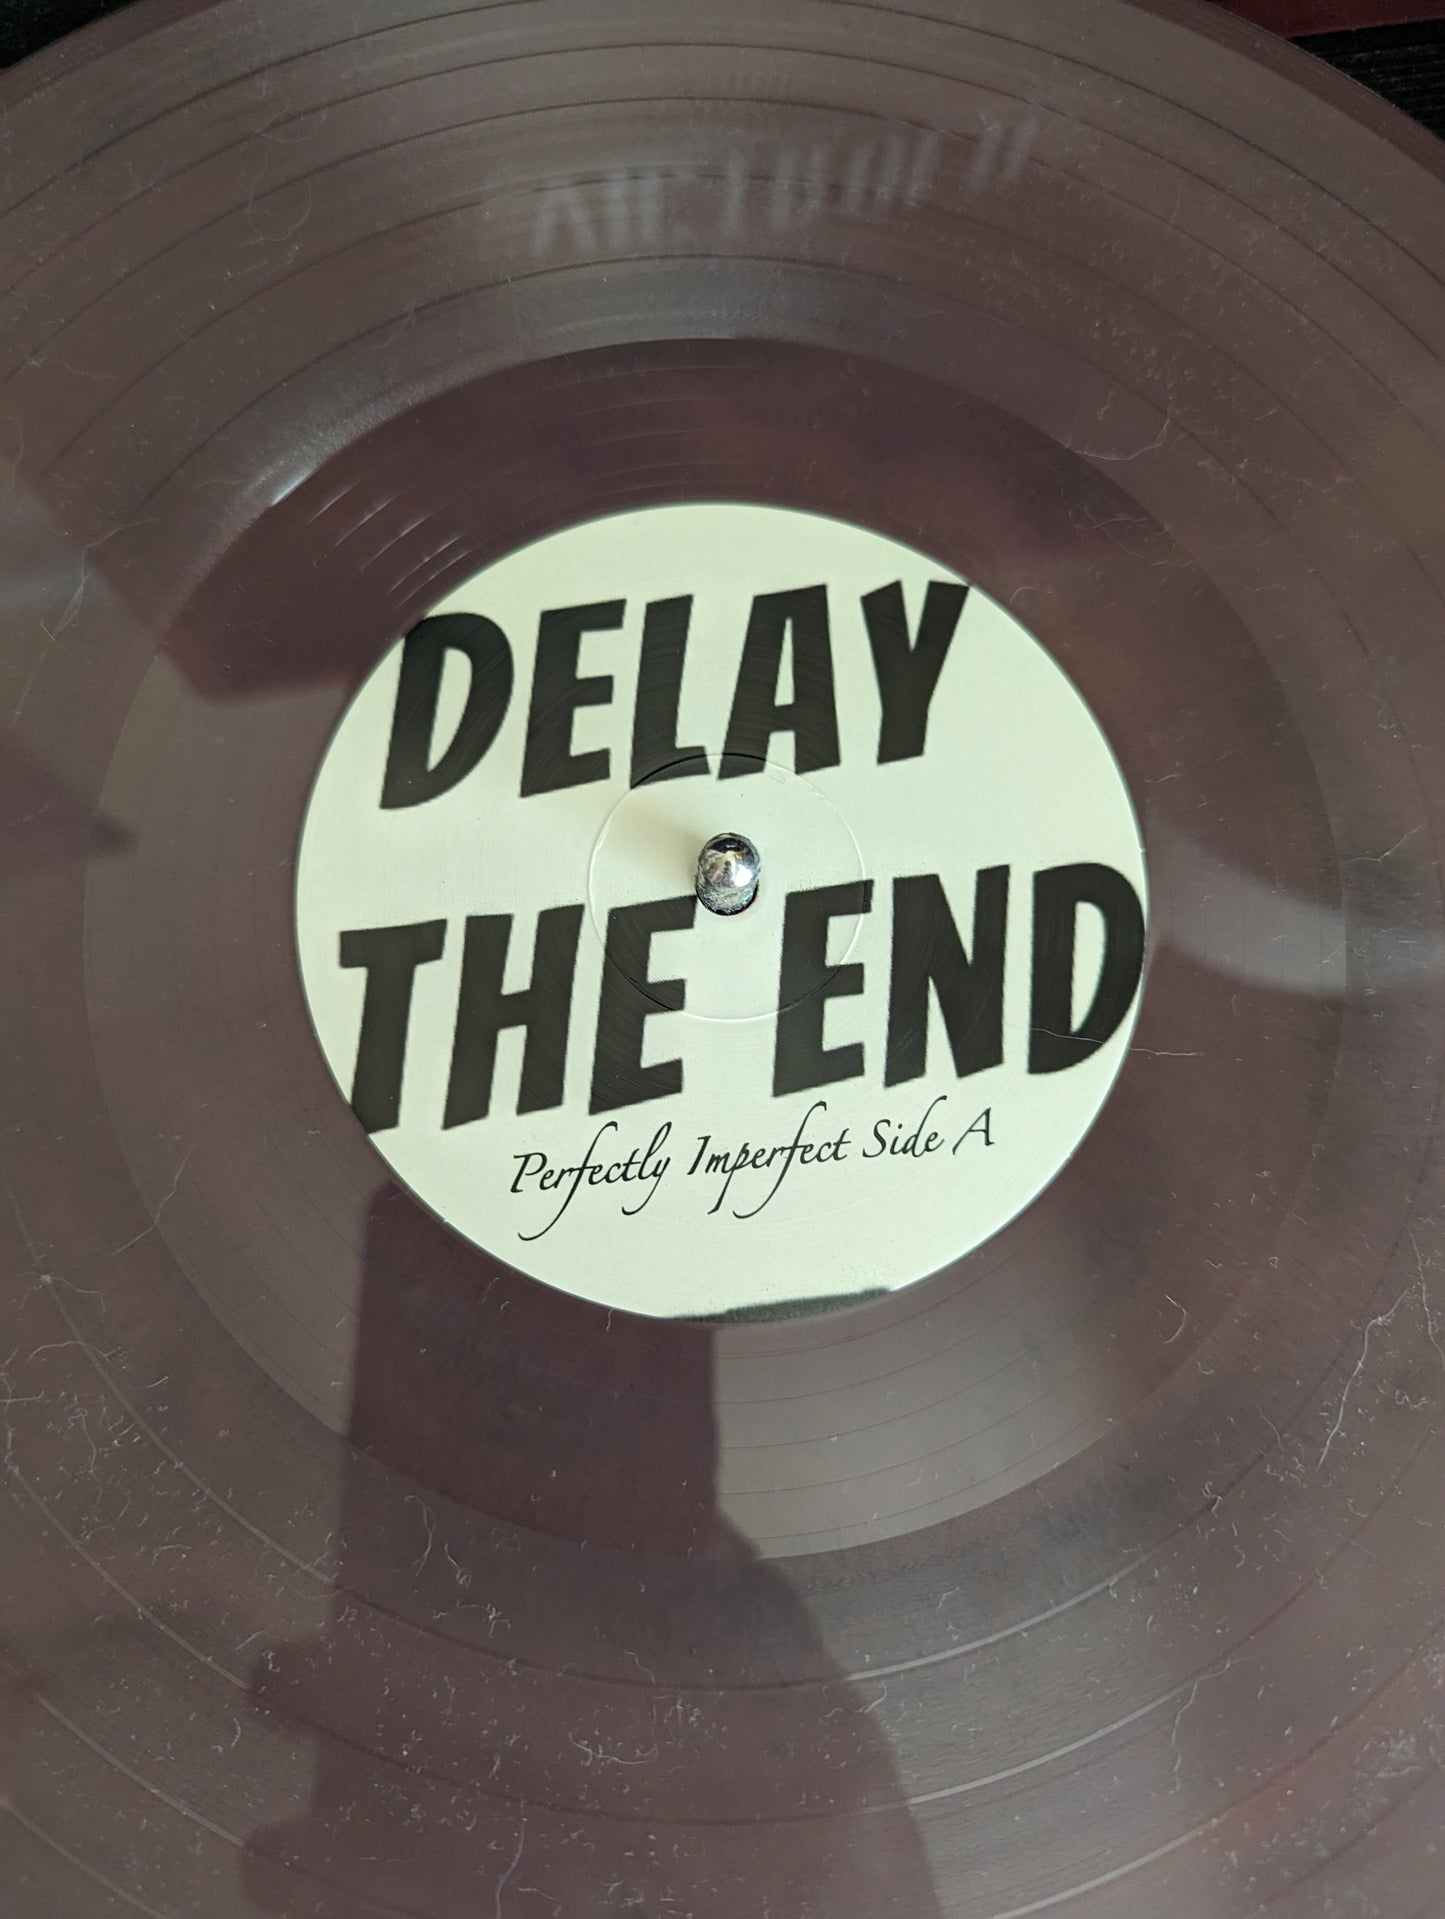 *NEW* Delay the End - Perfectly Imperfect CD/Vinly/T-shirt Bundle!